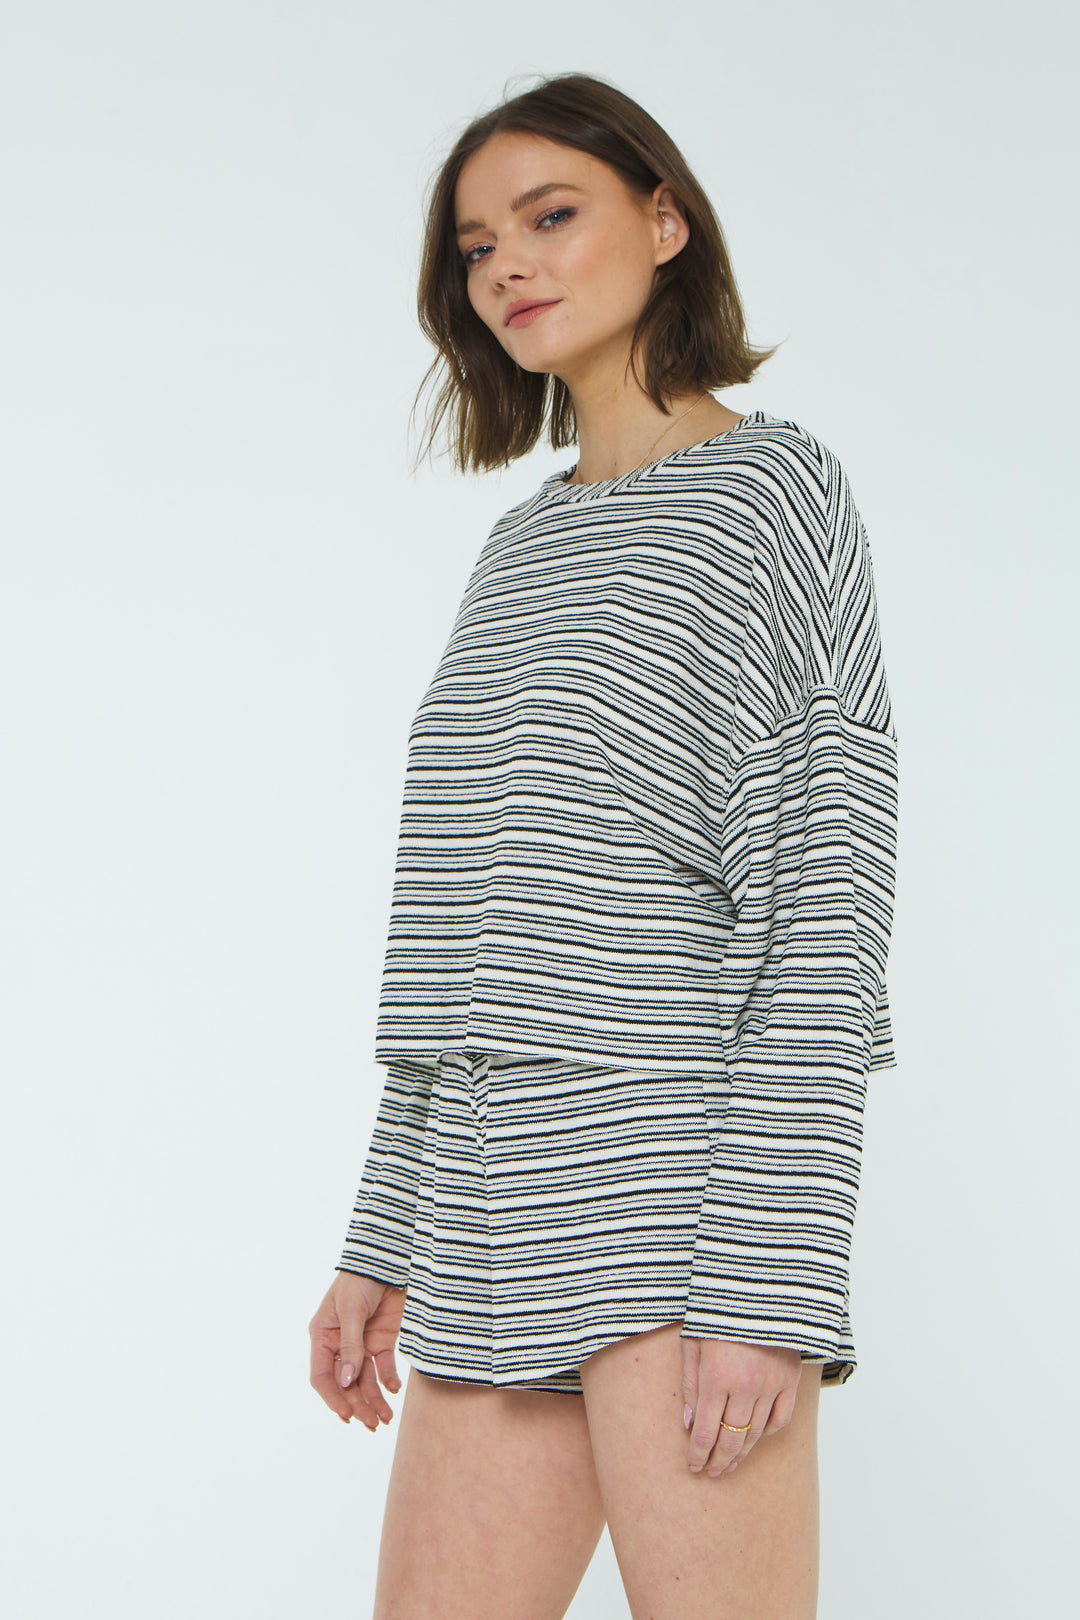 BRESLIN STRIPED TOP - Kingfisher Road - Online Boutique